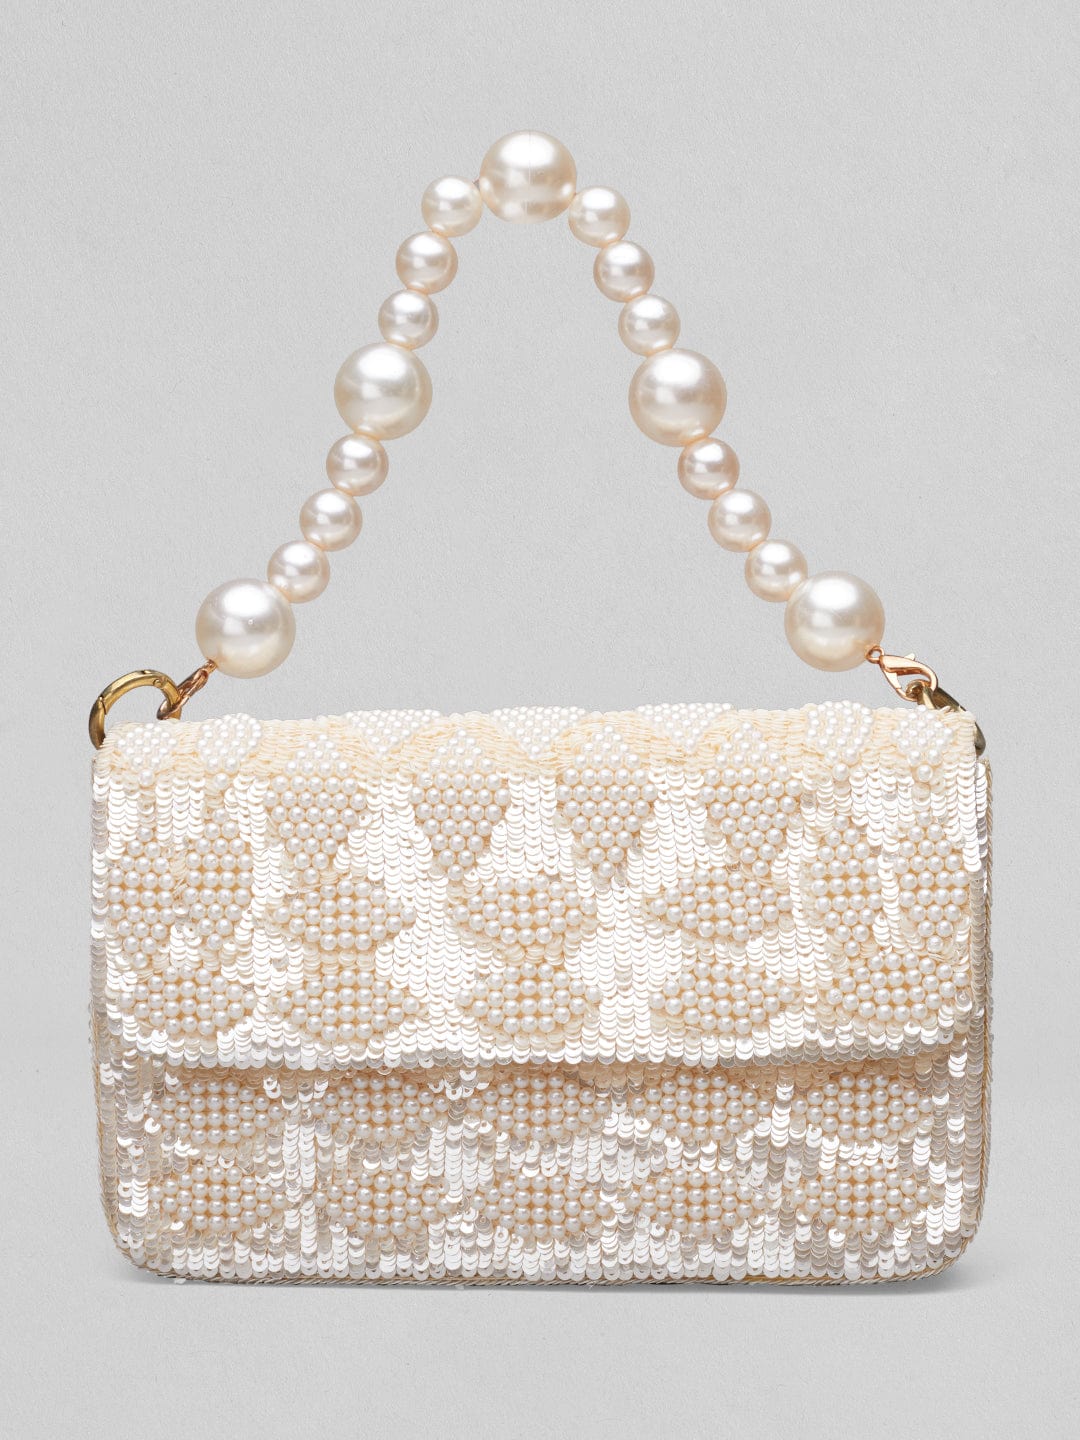 Rubans Cream Colour Handbag With Embroided Design And Pearls. Handbag, Wallet Accessories &amp; Clutches